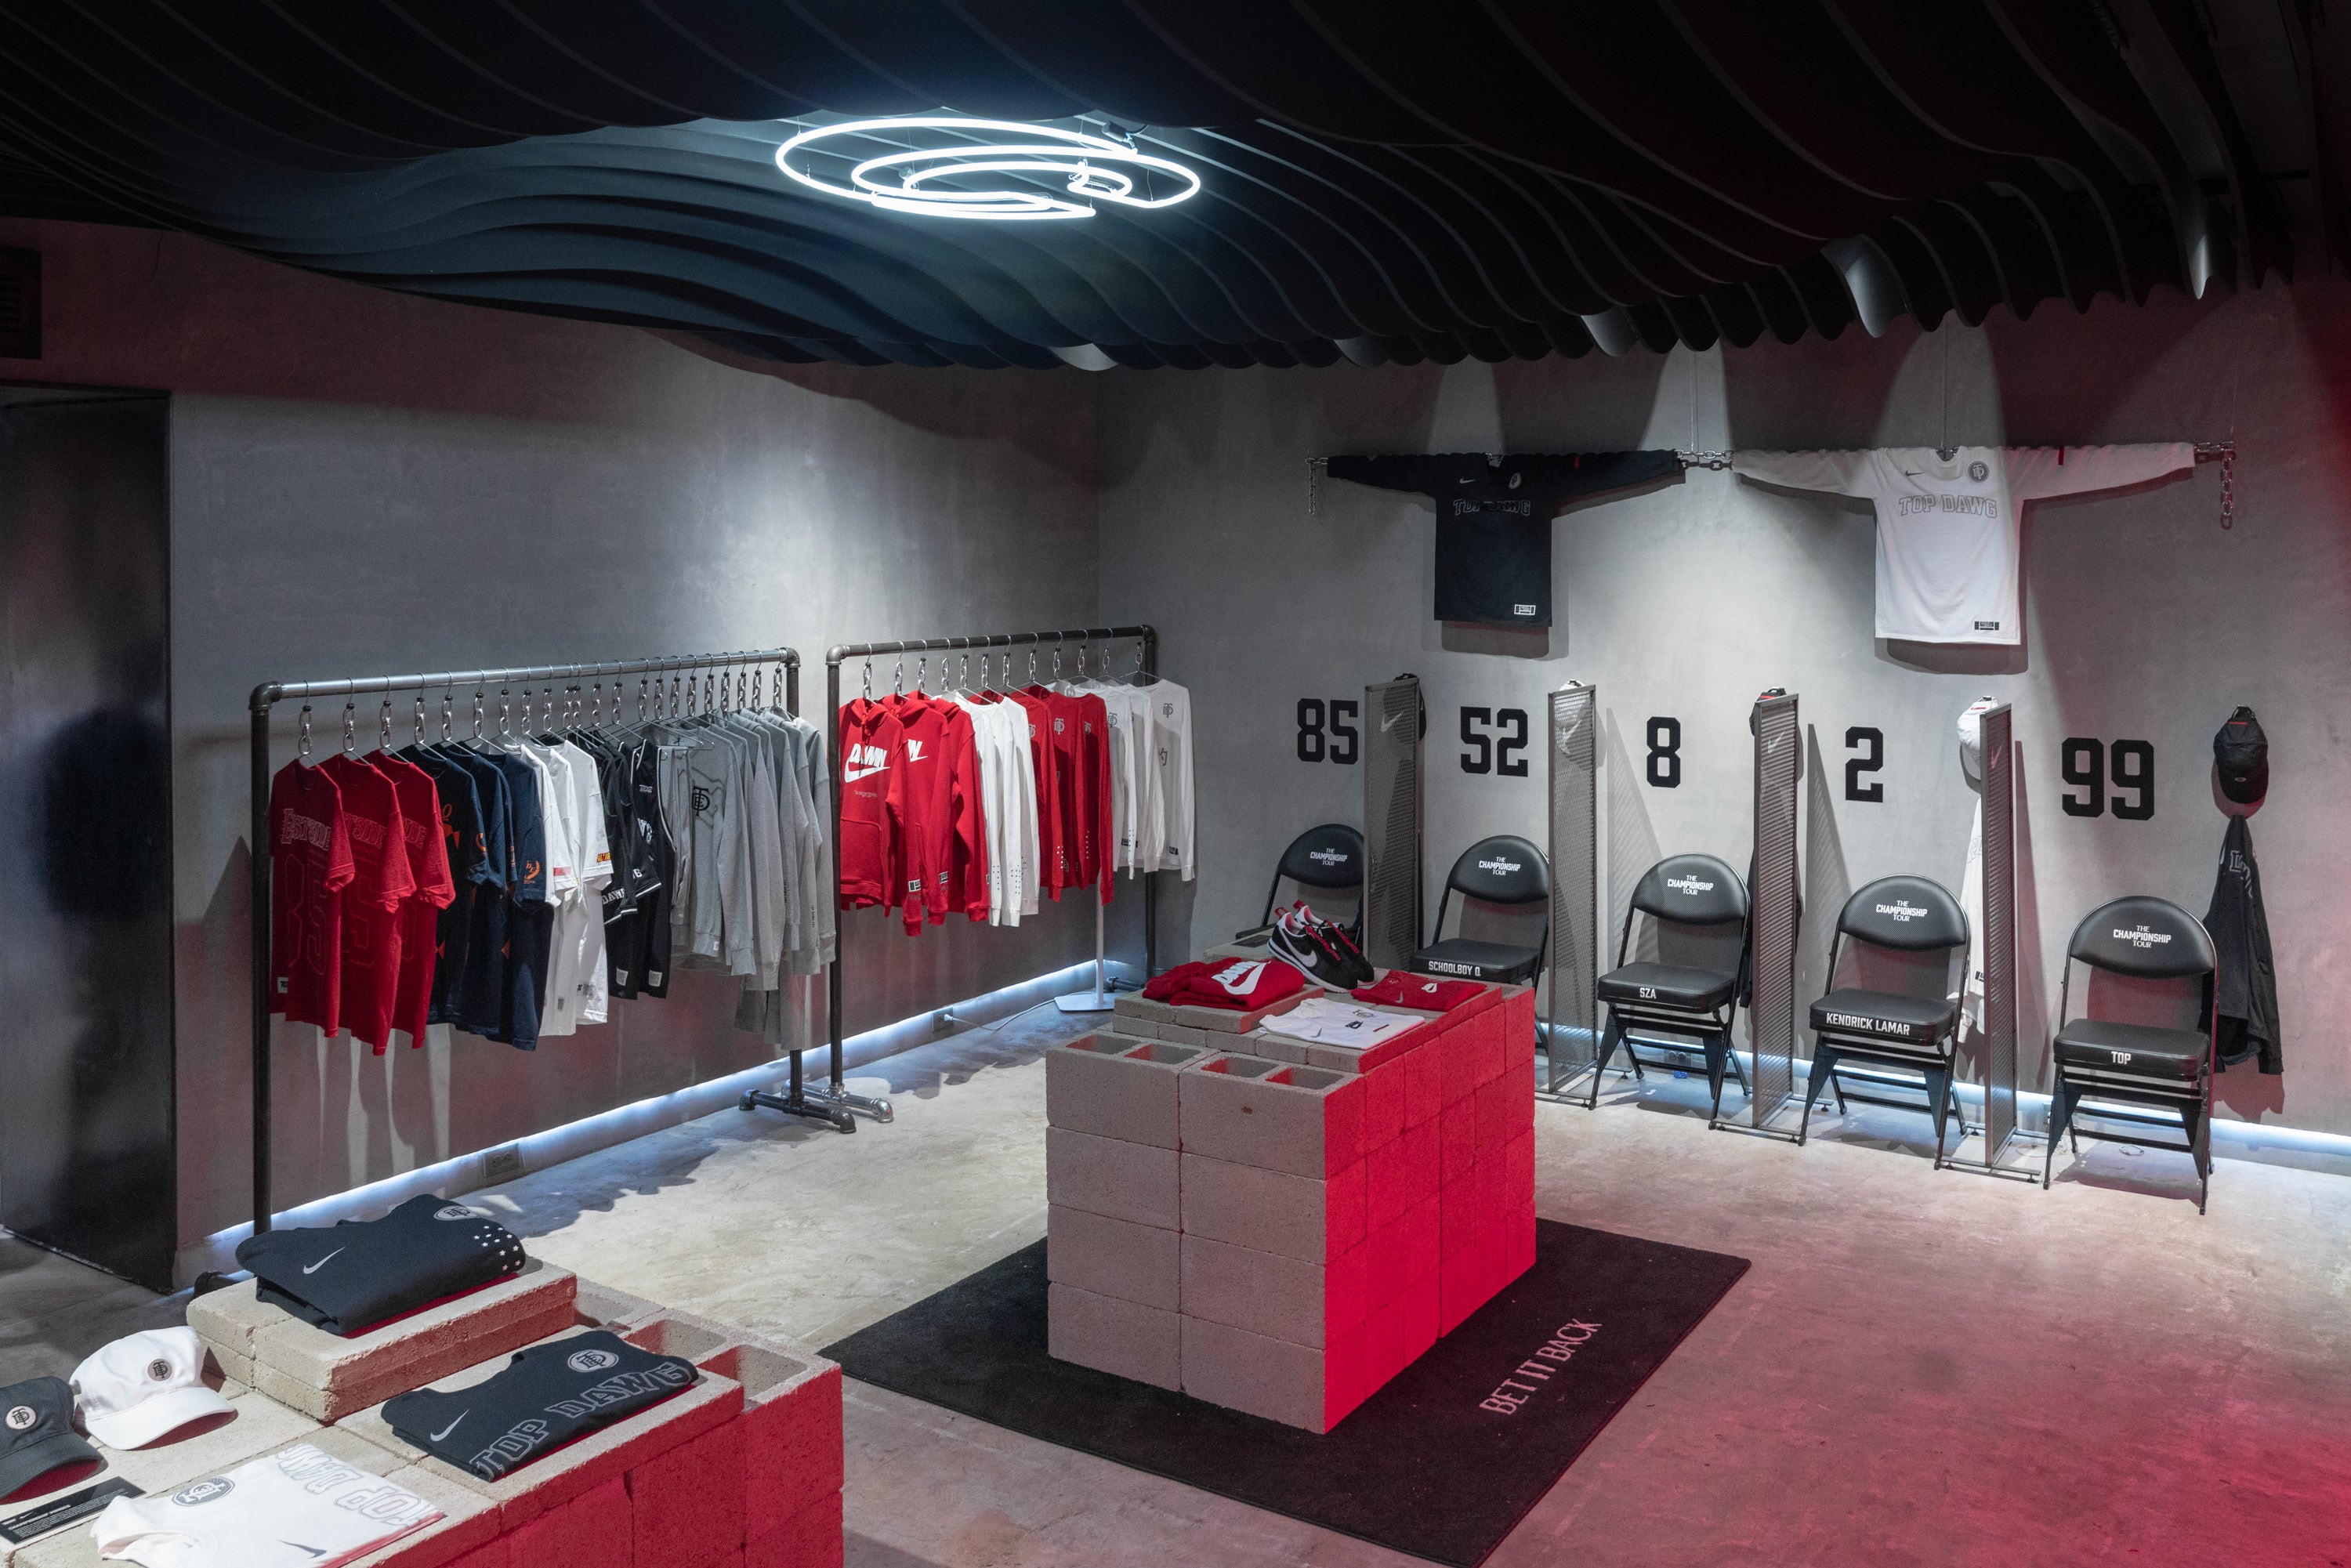 Nike x TDE Championship Tour Pop-up Shop hosted by Concepts